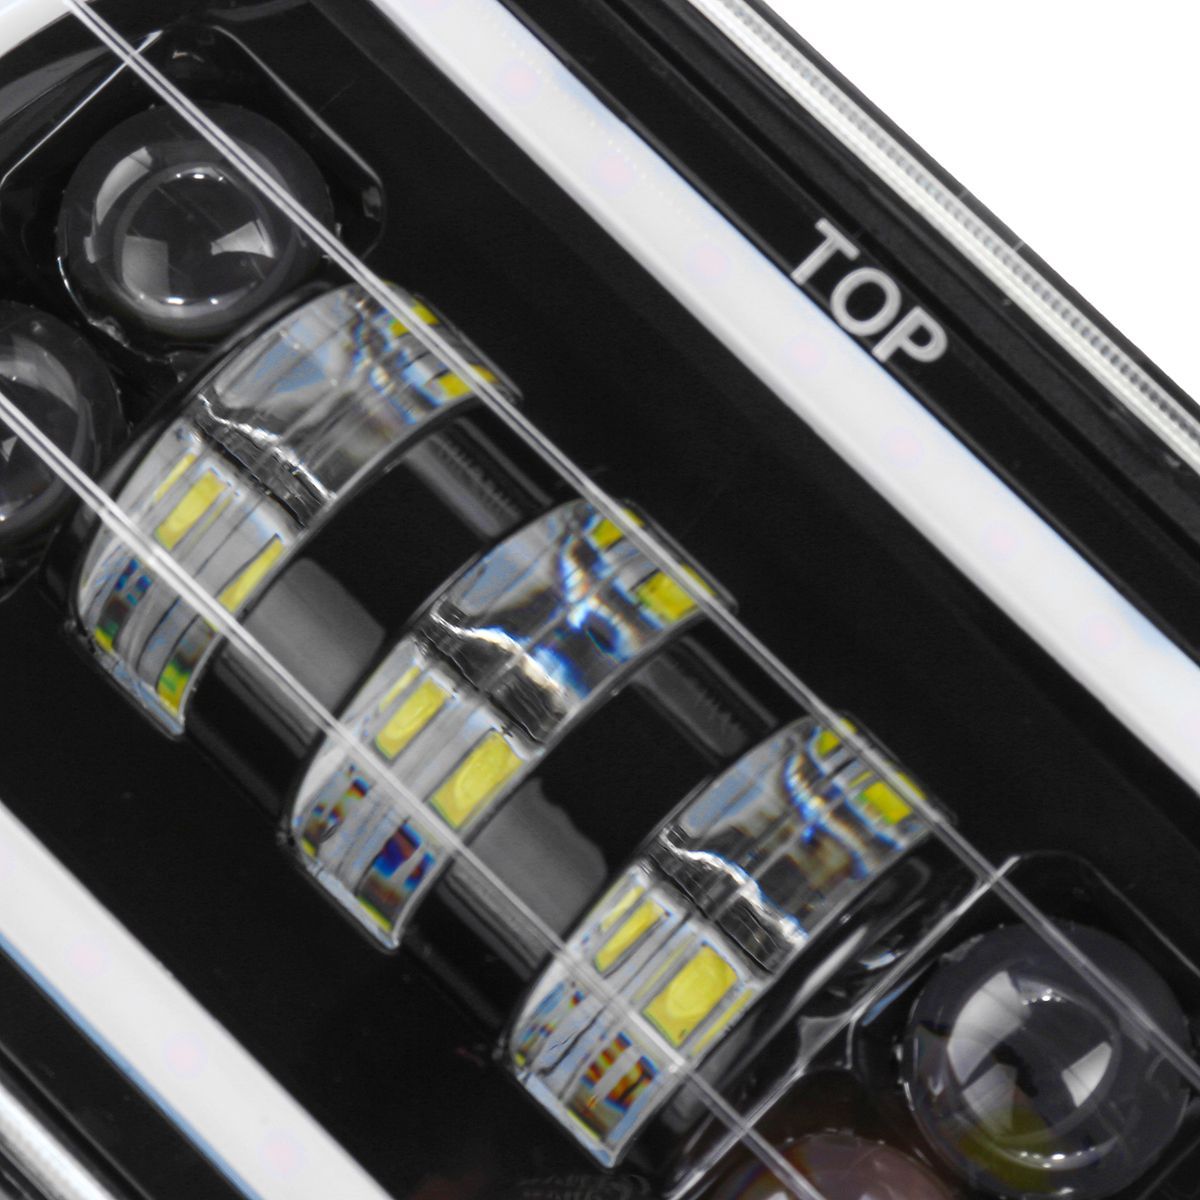 4x6Inch-LED-Car-Headlights-Square-HighLow-Beam-with-H4-Bulb-12-24V-30W-45003000LM-White-for-JEEP-Wra-1464468